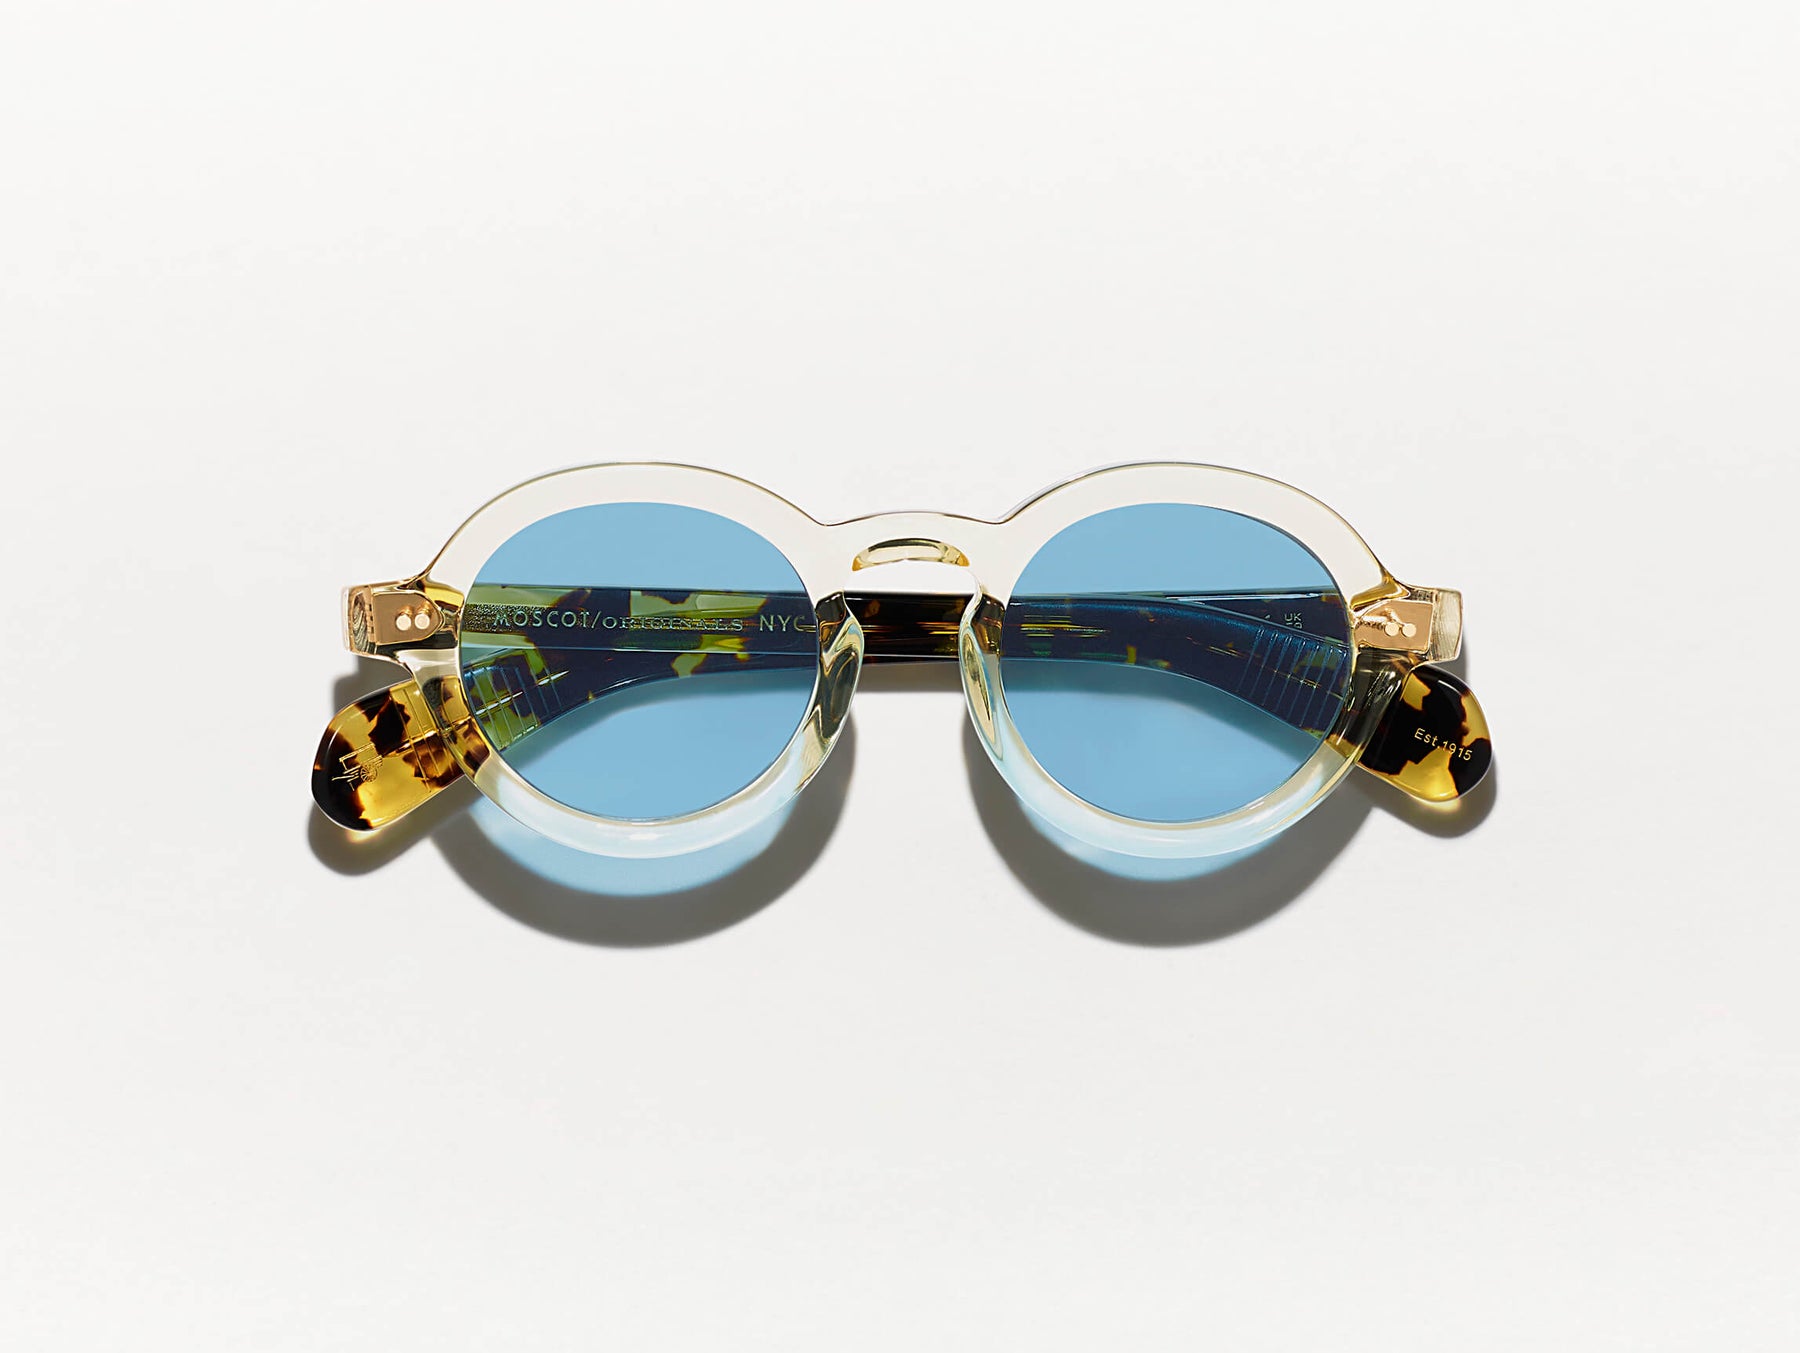 The FOYGEL SUN in Citron/Tortoise with Celebrity Blue Tinted Lenses